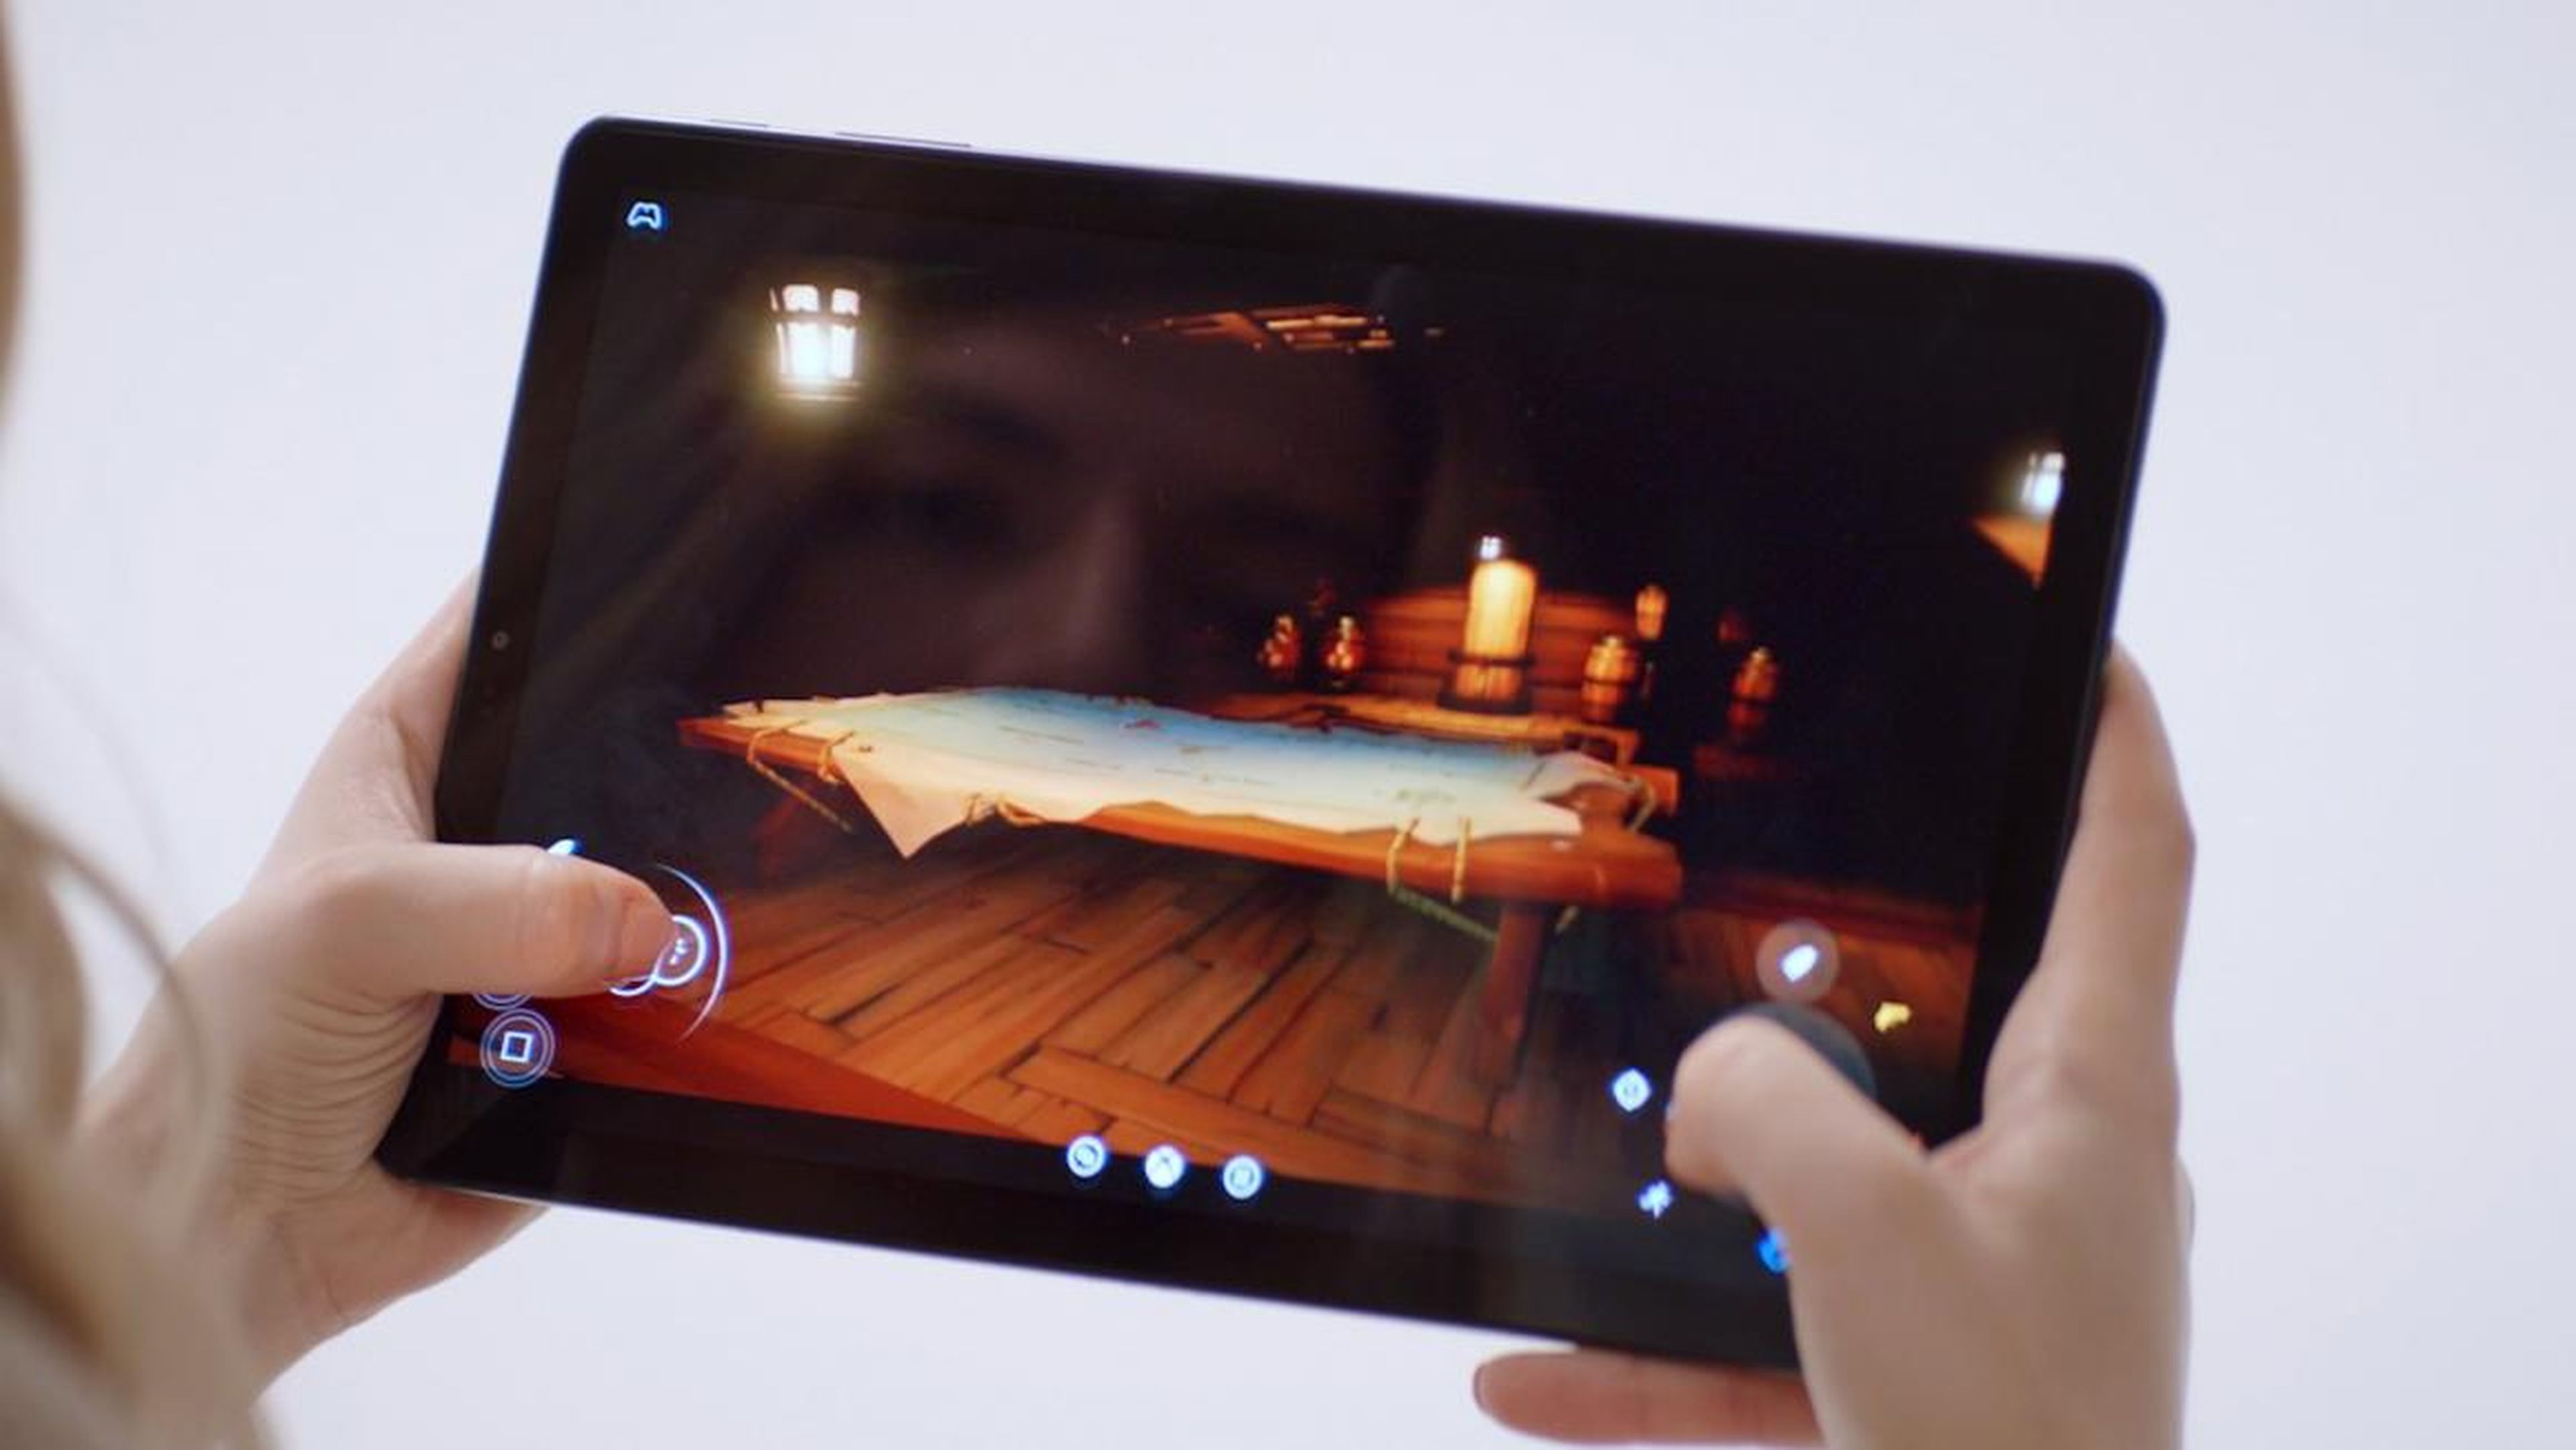 Instead of using an Xbox gamepad, virtual buttons represent the gamepad on this tablet running Project xCloud game streaming.